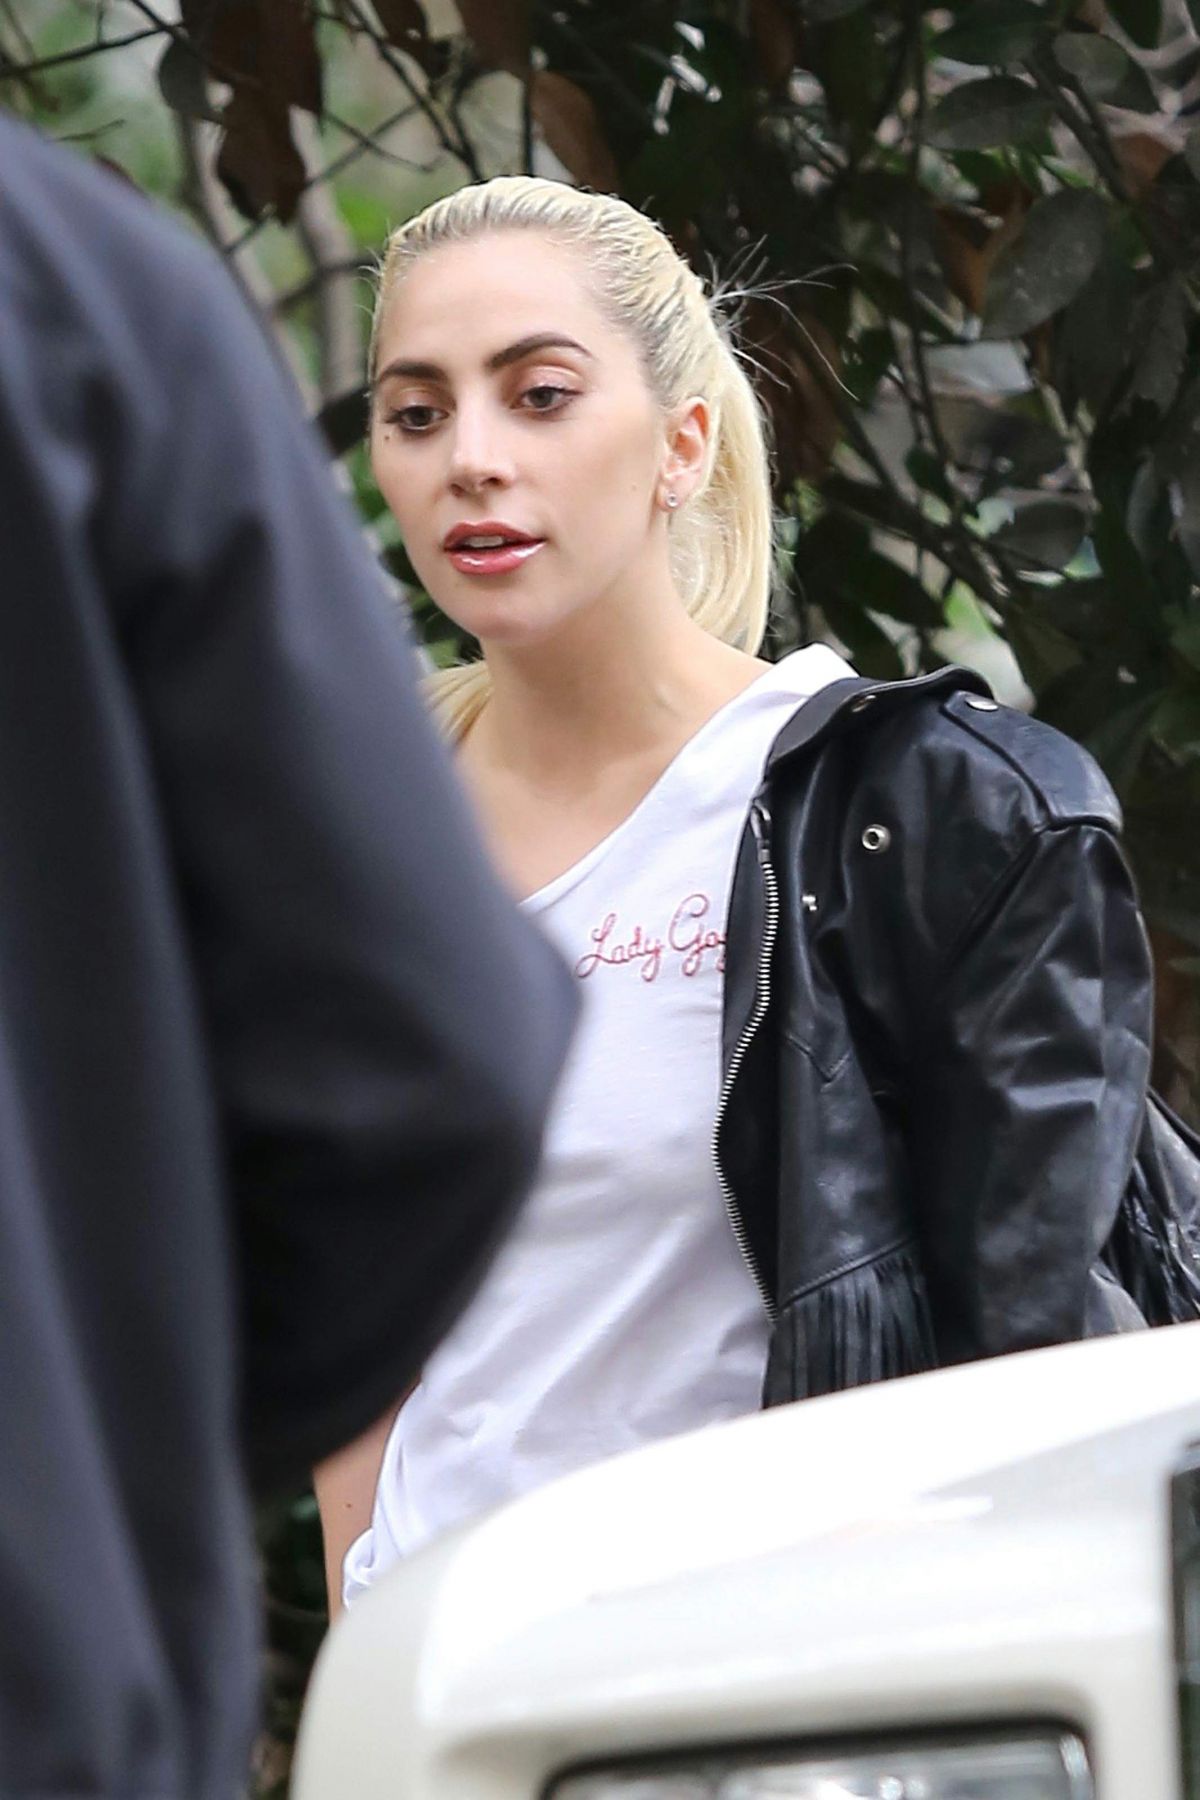 LADY GAGA at Bradley Cooper’s House in Brentwood 12/10/2016 – HawtCelebs